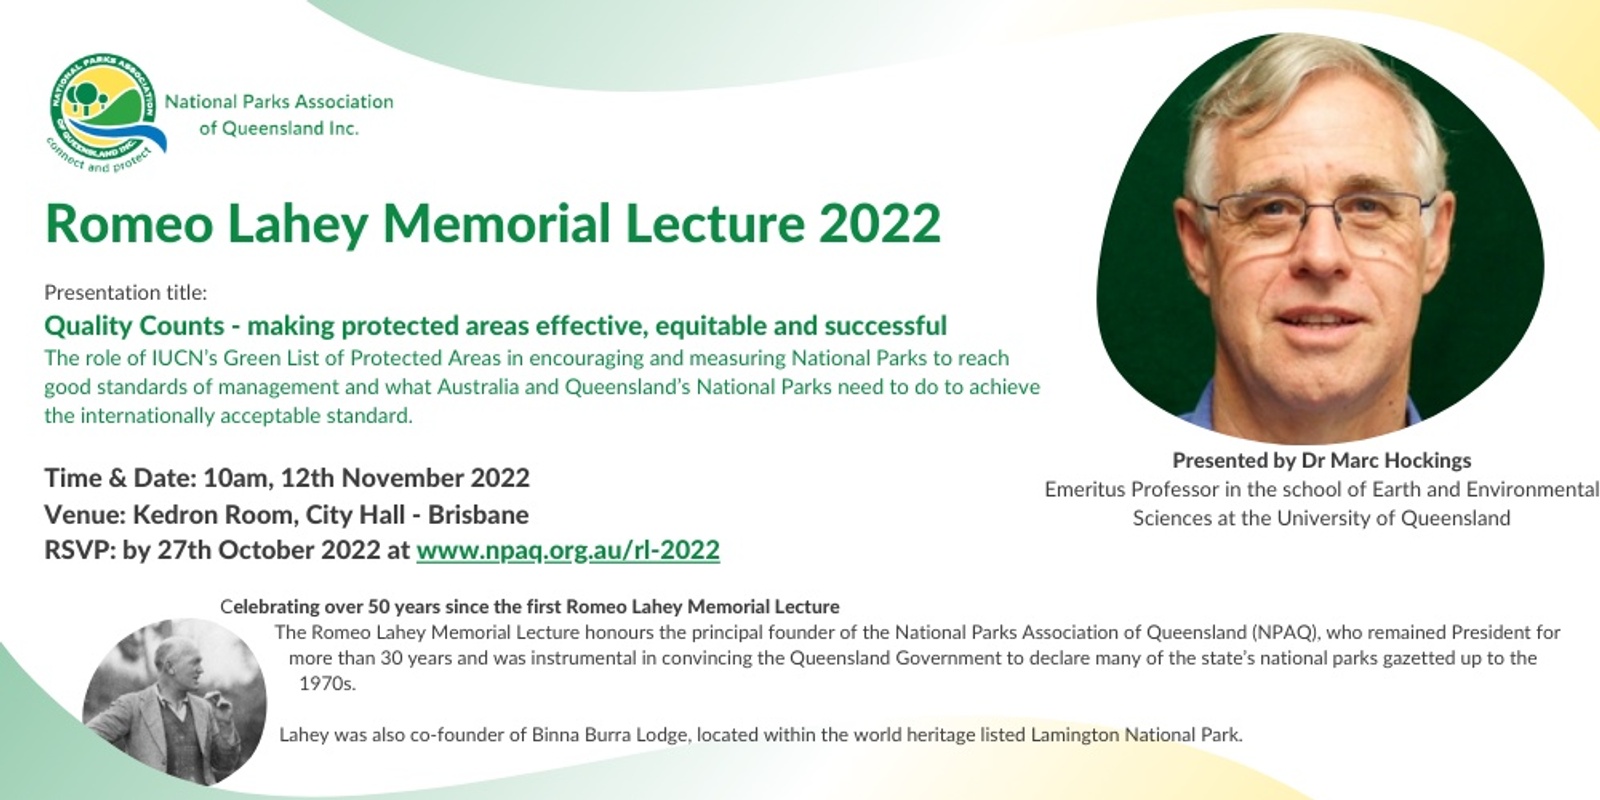 Banner image for NPAQ Romeo Lahey Memorial Lecture 2022